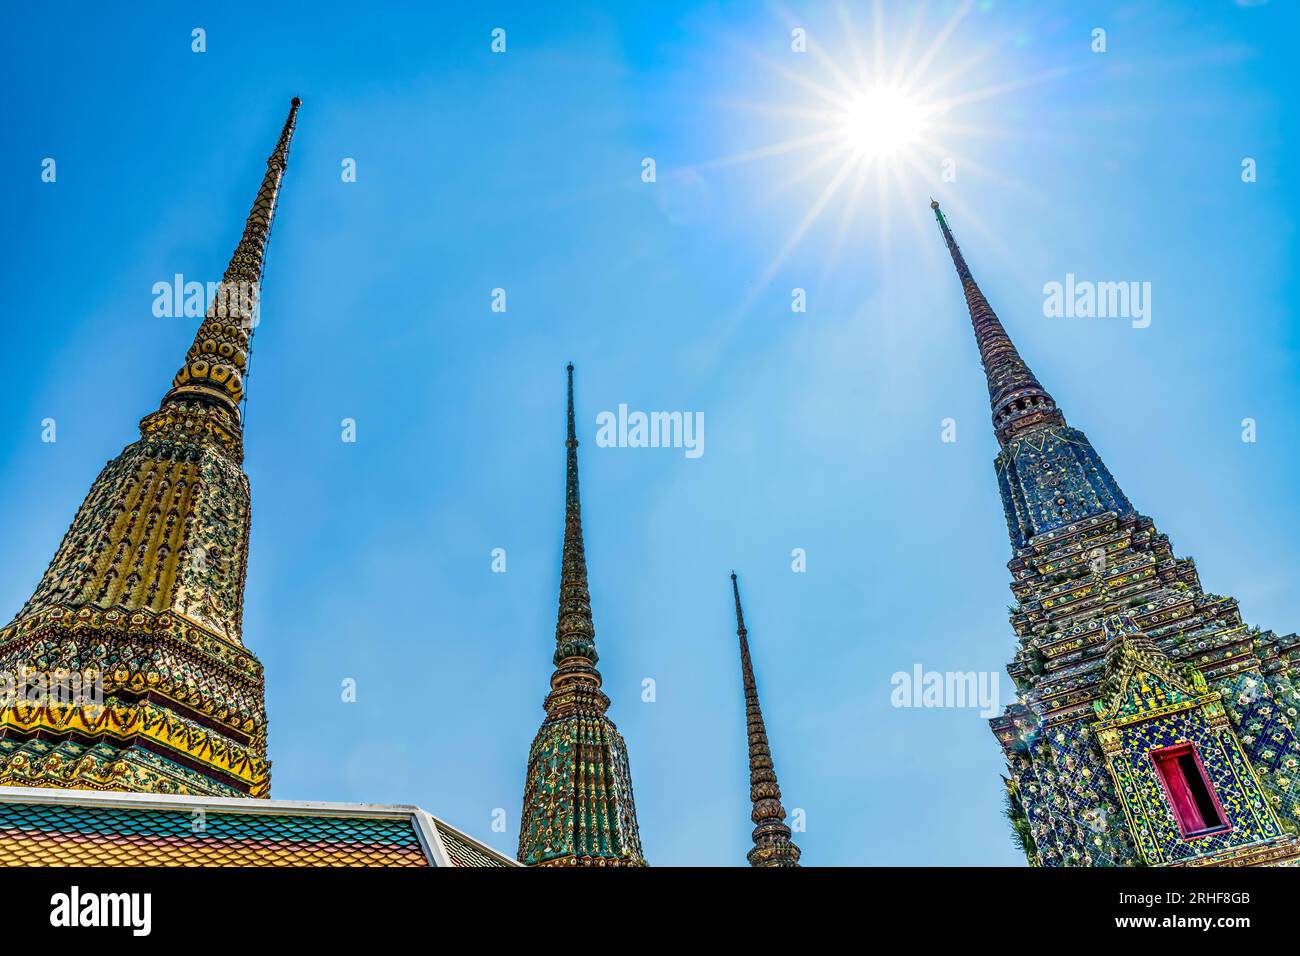 Ceramic Chedis Spires Pagodas Stretching to Sun Wat Pho Po Temple Complex Bangkok Thailand. Built in 1600s. One of oldest temples in Thailand. Stock Photo